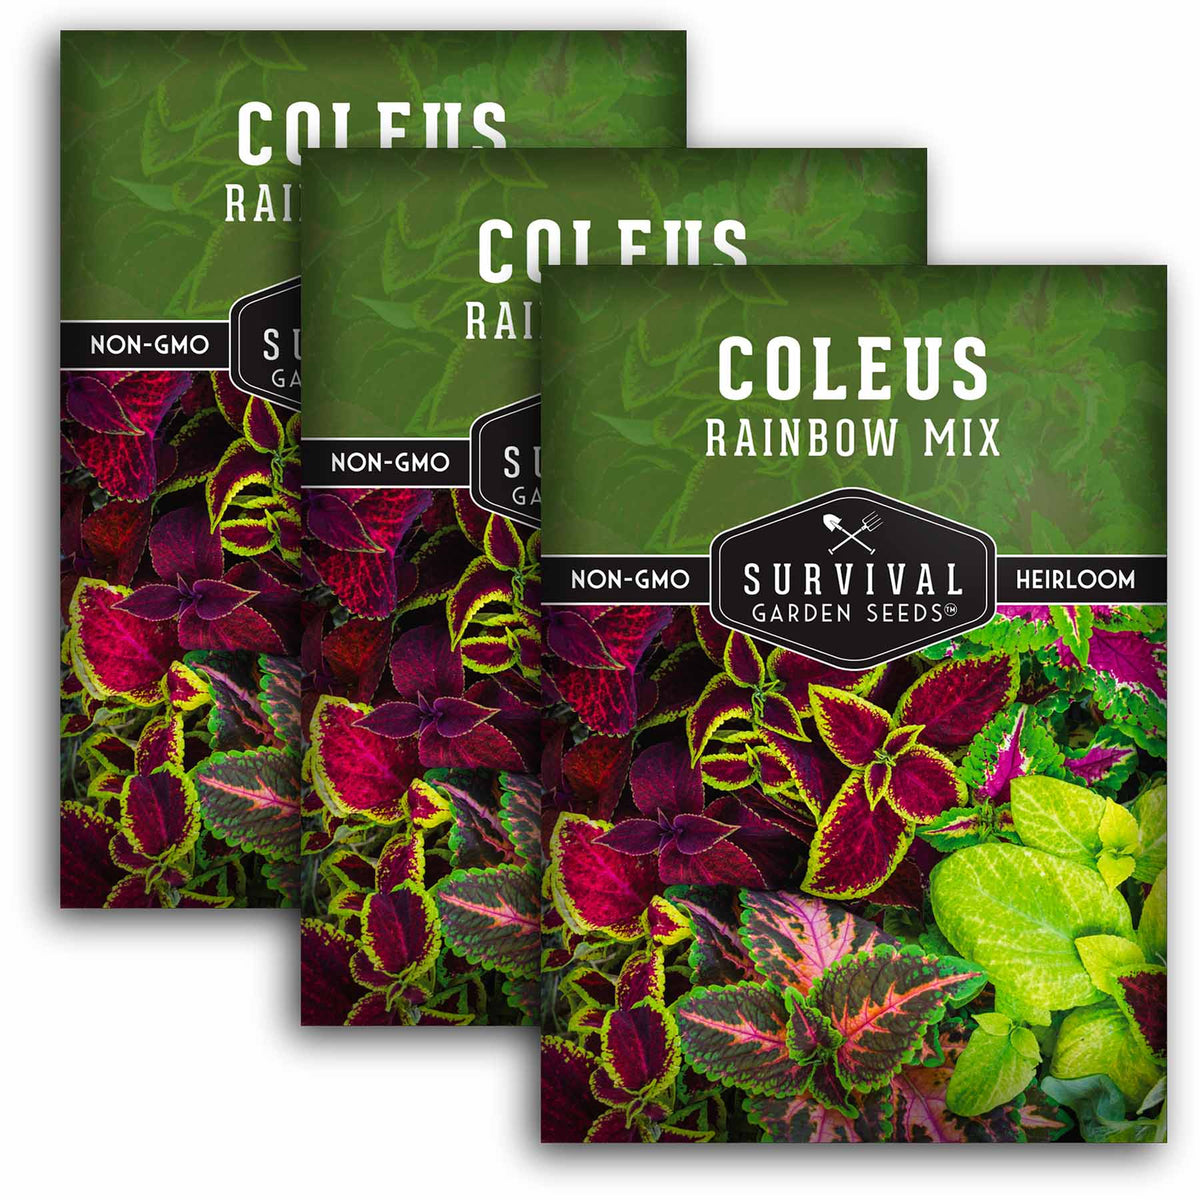 3 packets of Rainbow Mix Coleus seeds